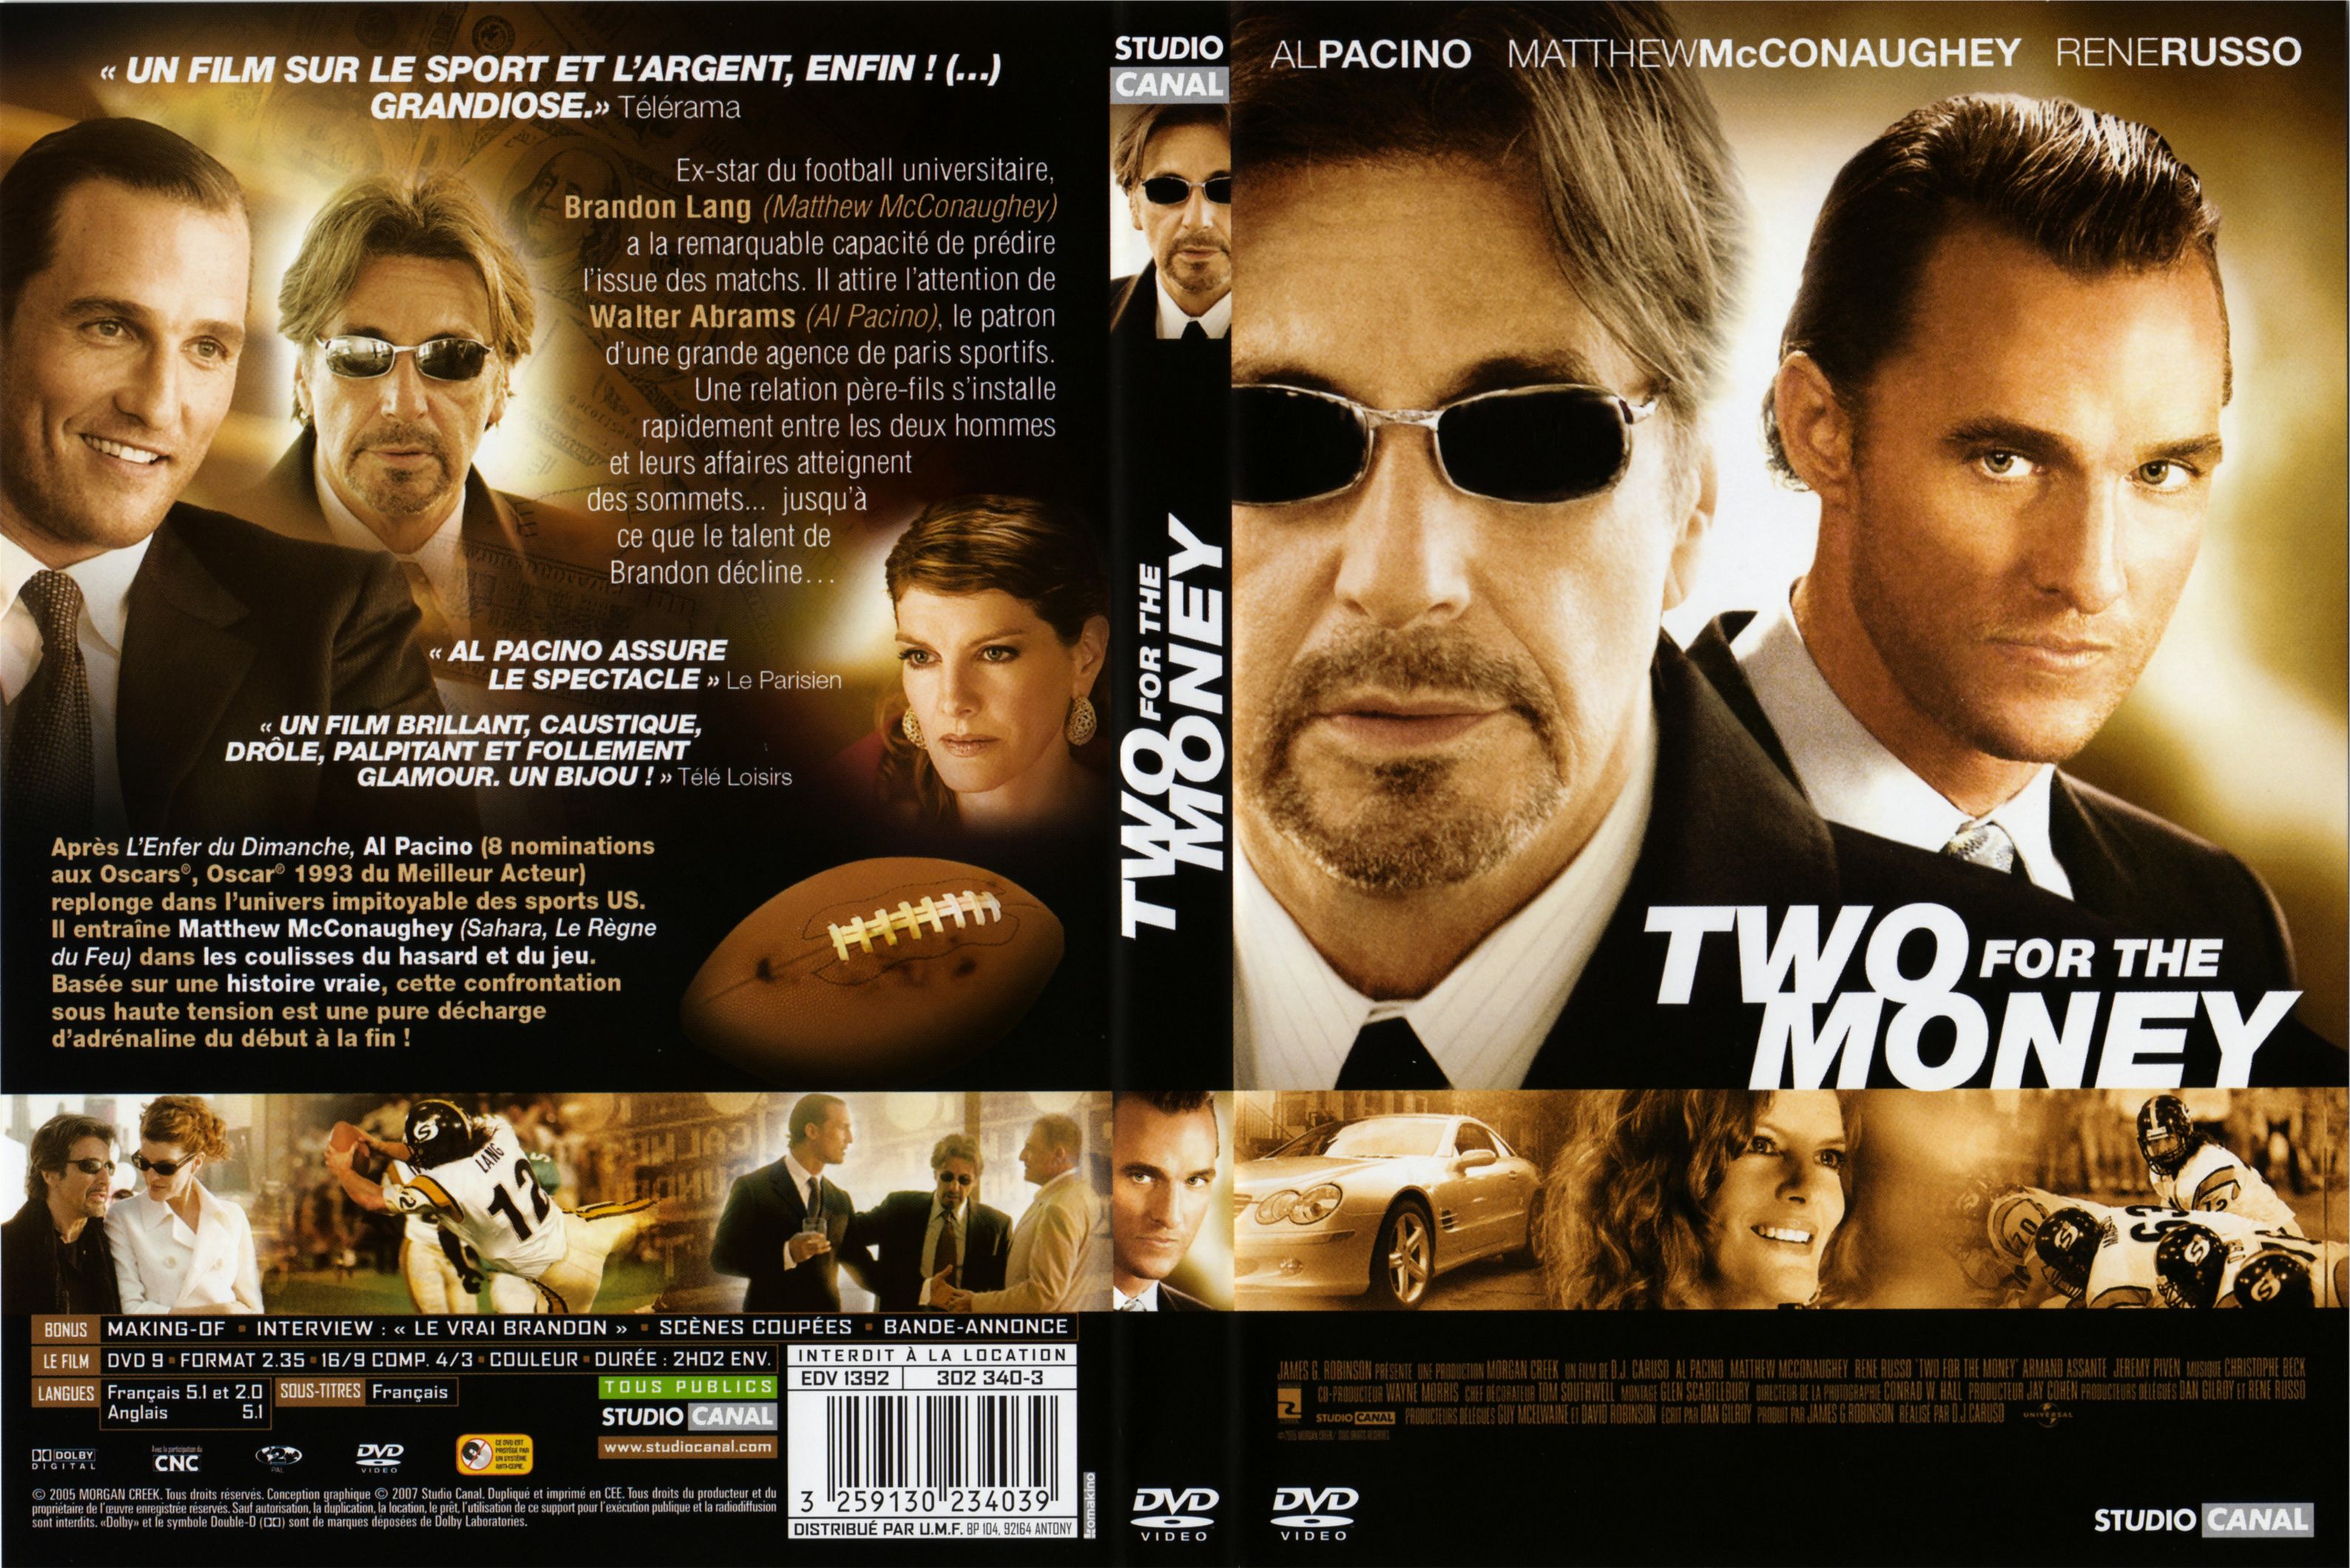 Jaquette DVD Two for the money